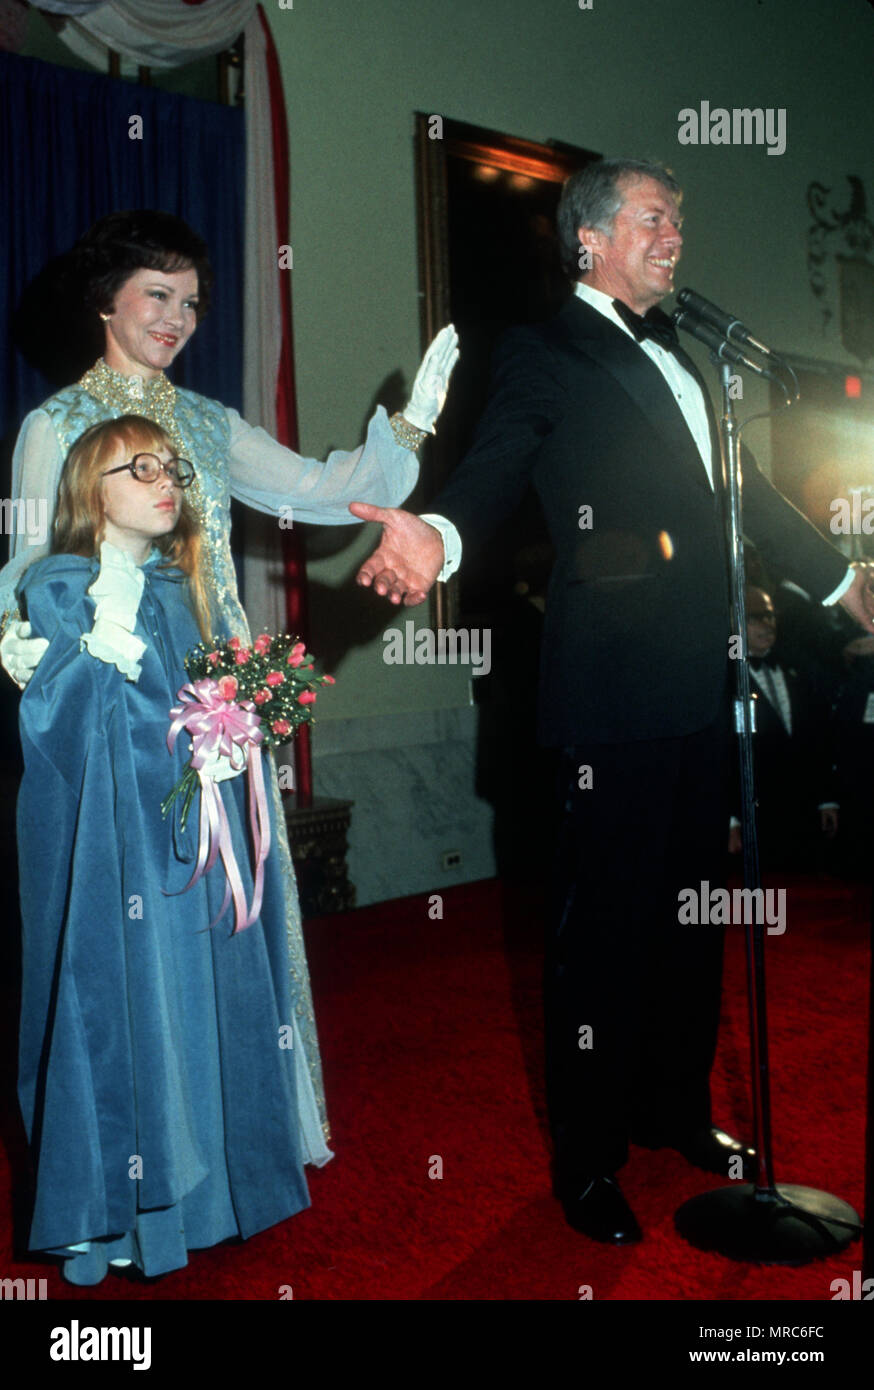 Washington, DC 1977/01/20 President Jimmy Carter and Rosslyn and Amy Carter at an Inaugural Ball at the Mayflower Hotel on the night of the Carter inauguration, January 20, 1977. Photo byDennis Brack B 1 Stock Photo